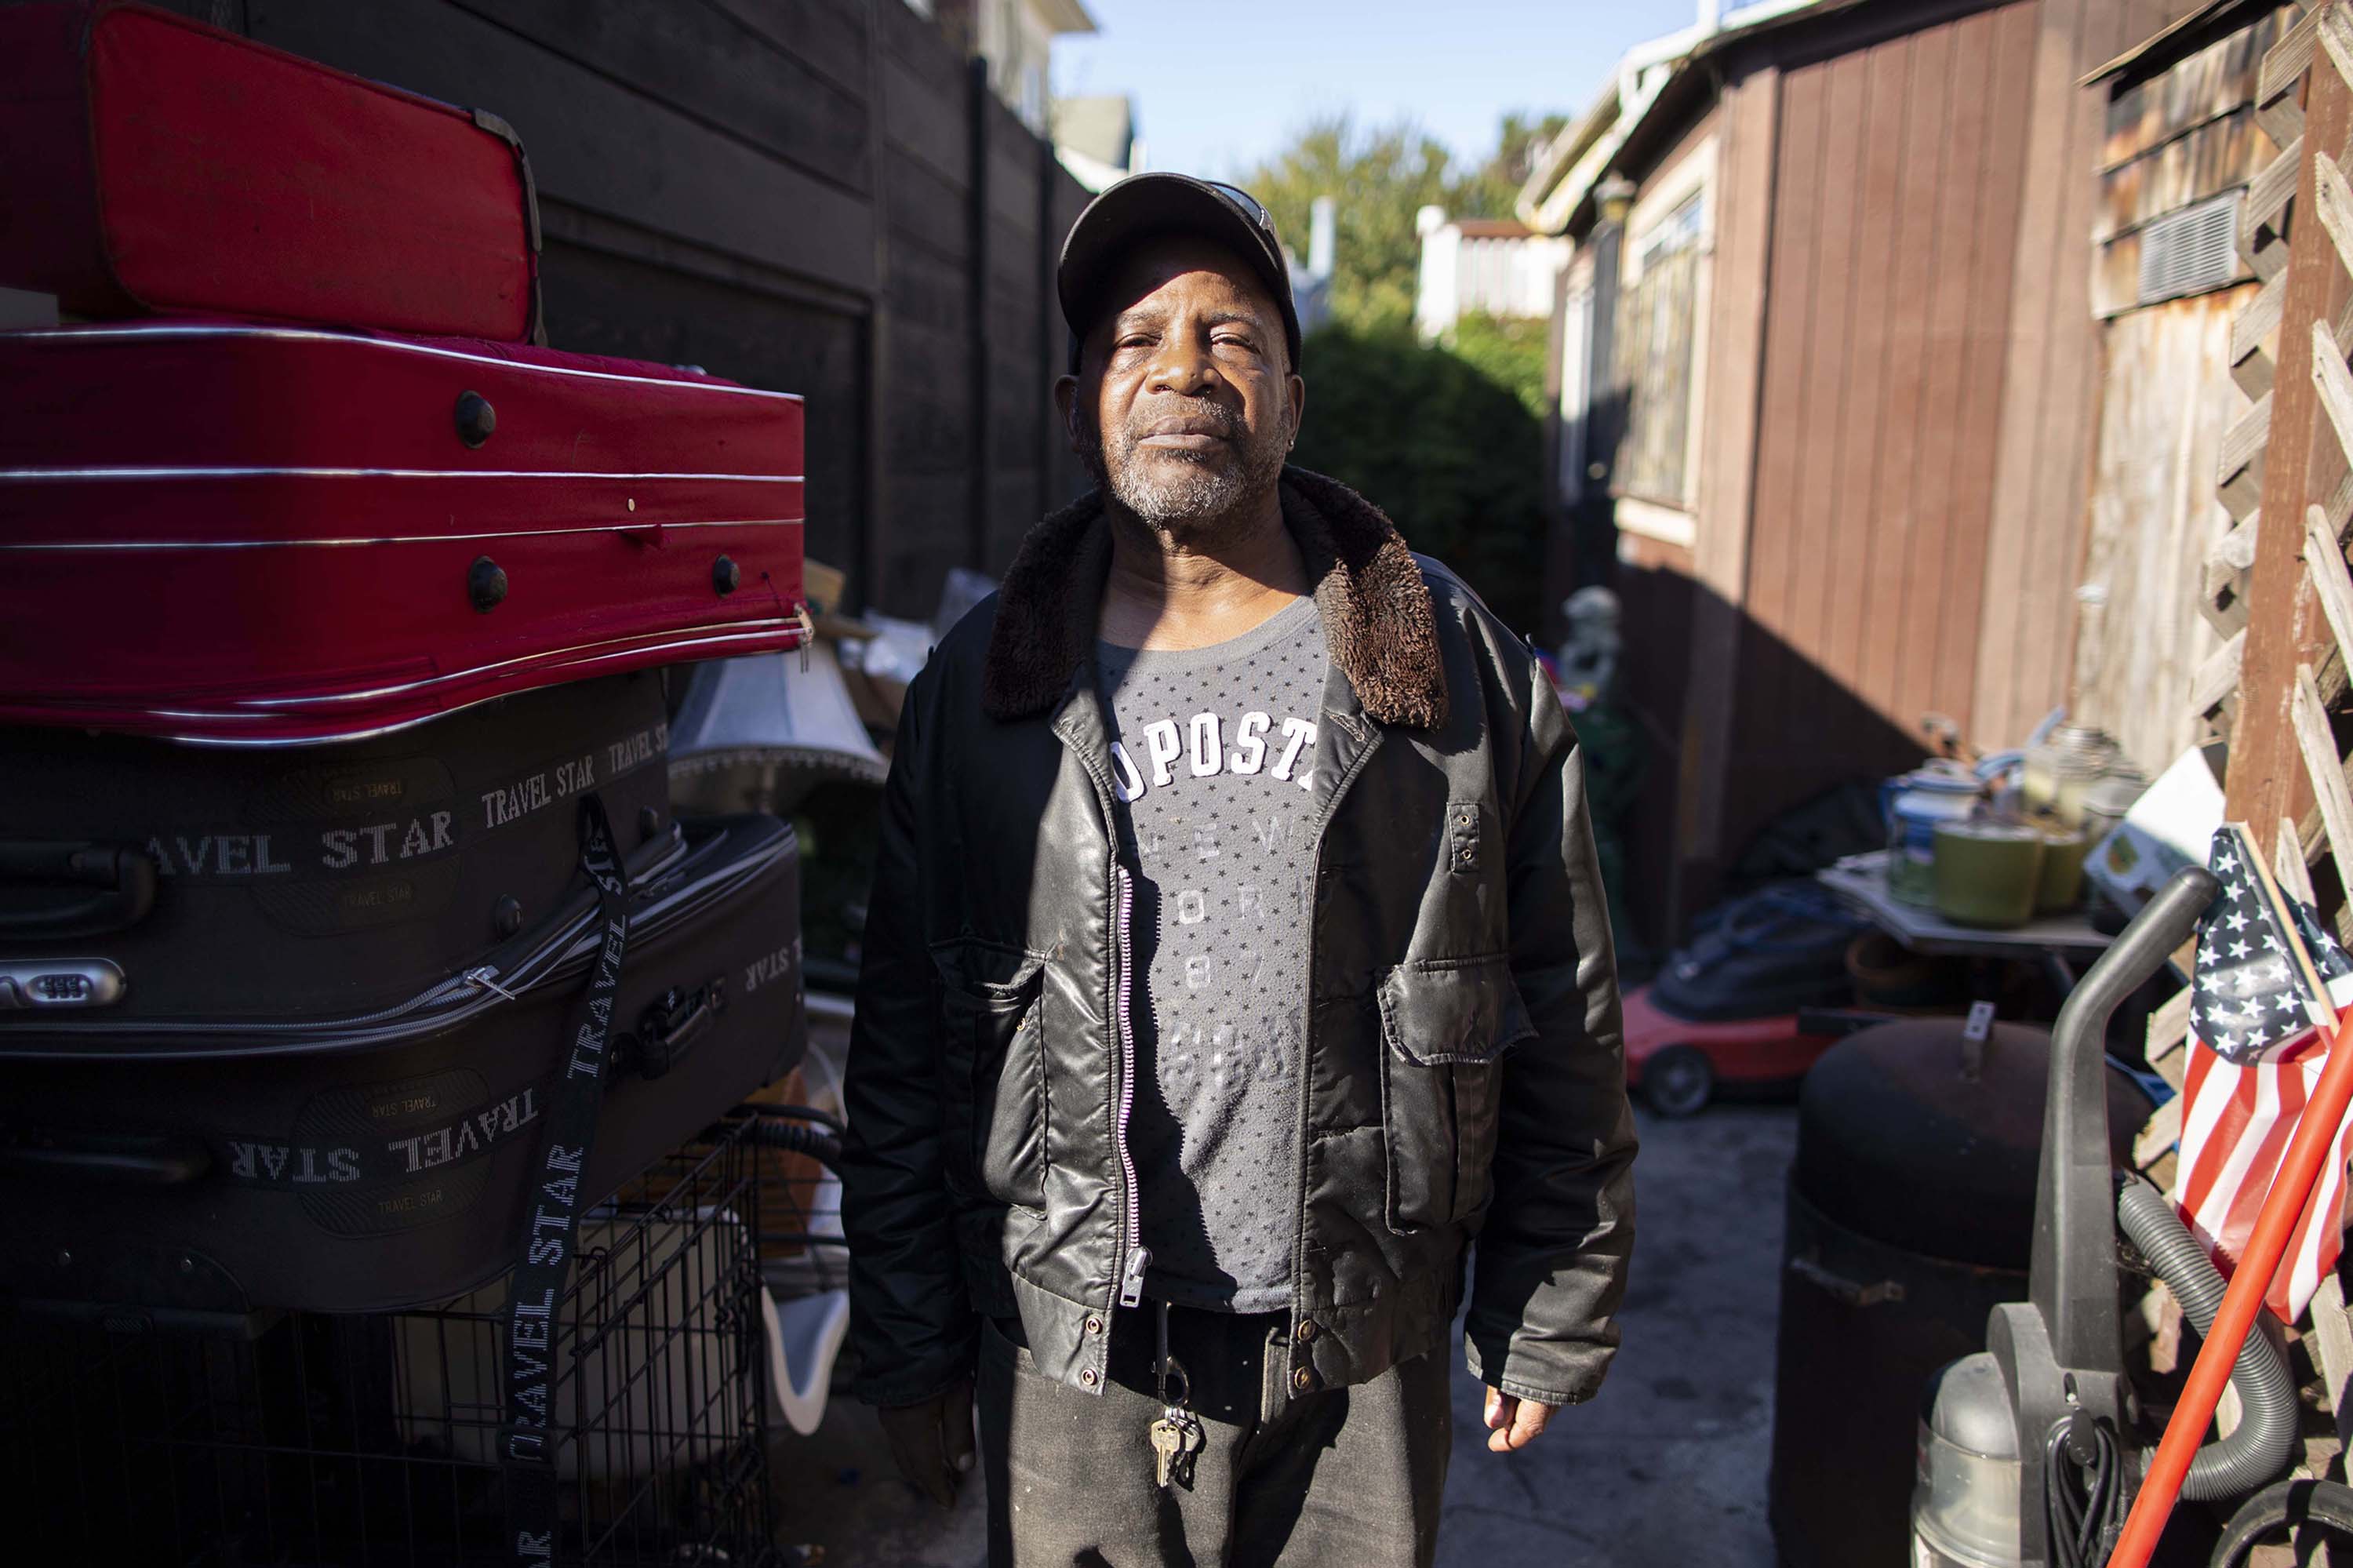 Darrell H. Brown has rented on this block since the mid-80s. But his landlord has asked him to leave, and he can’t afford another place in the neighborhood.